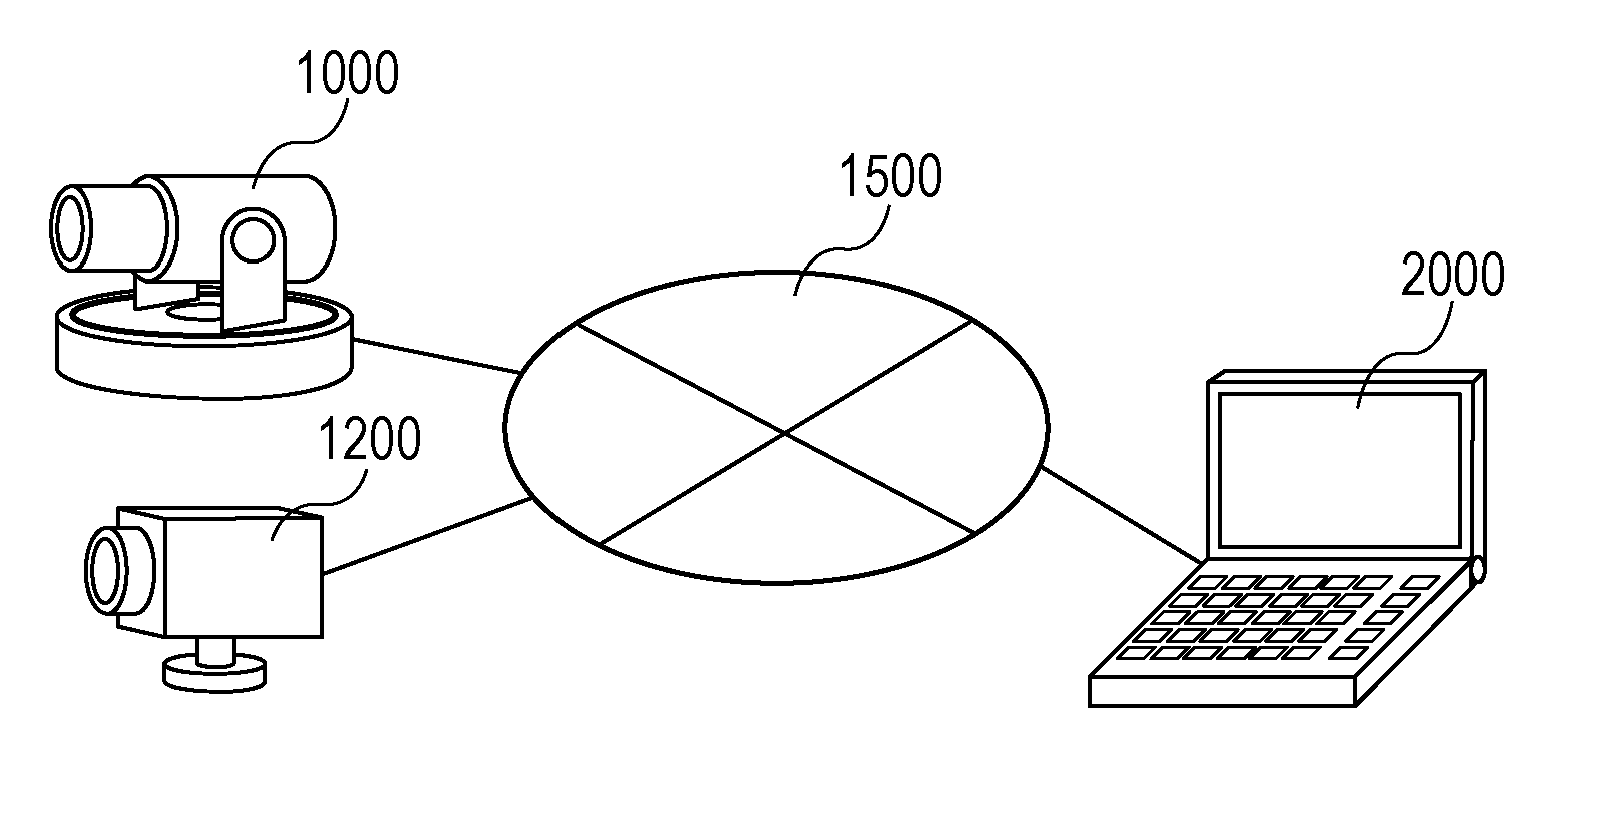 Image pickup system, image pickup apparatus, and method of controlling the same